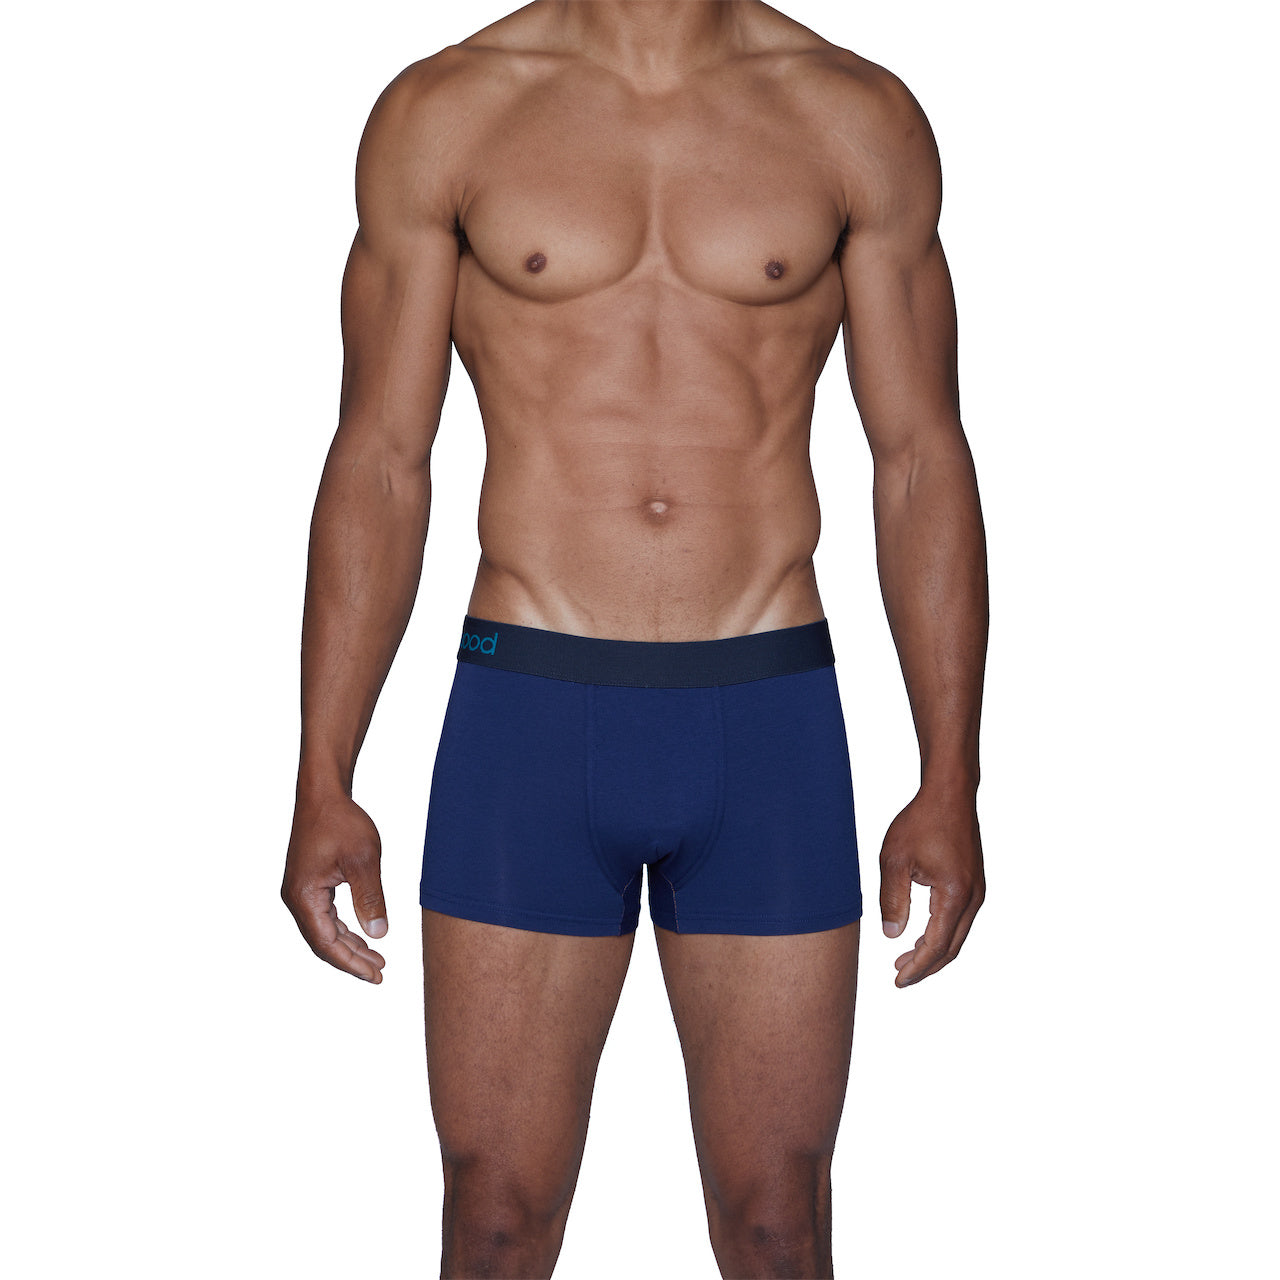 Wood Underwear Trunks - Solid Colour